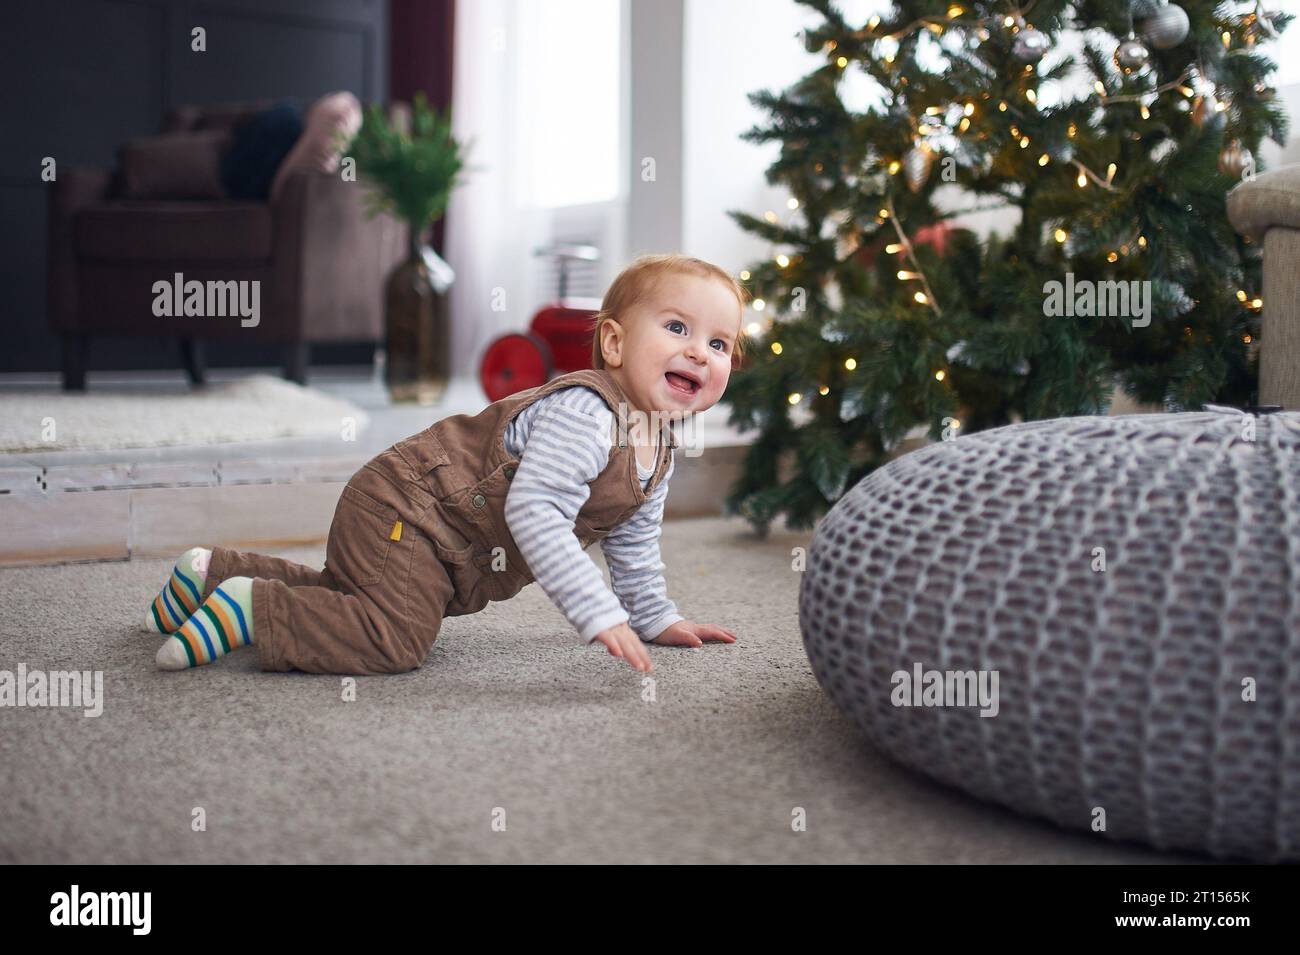 1 year old baby boy crawling on floor at home. christmas decorations on a background. Stock Photo